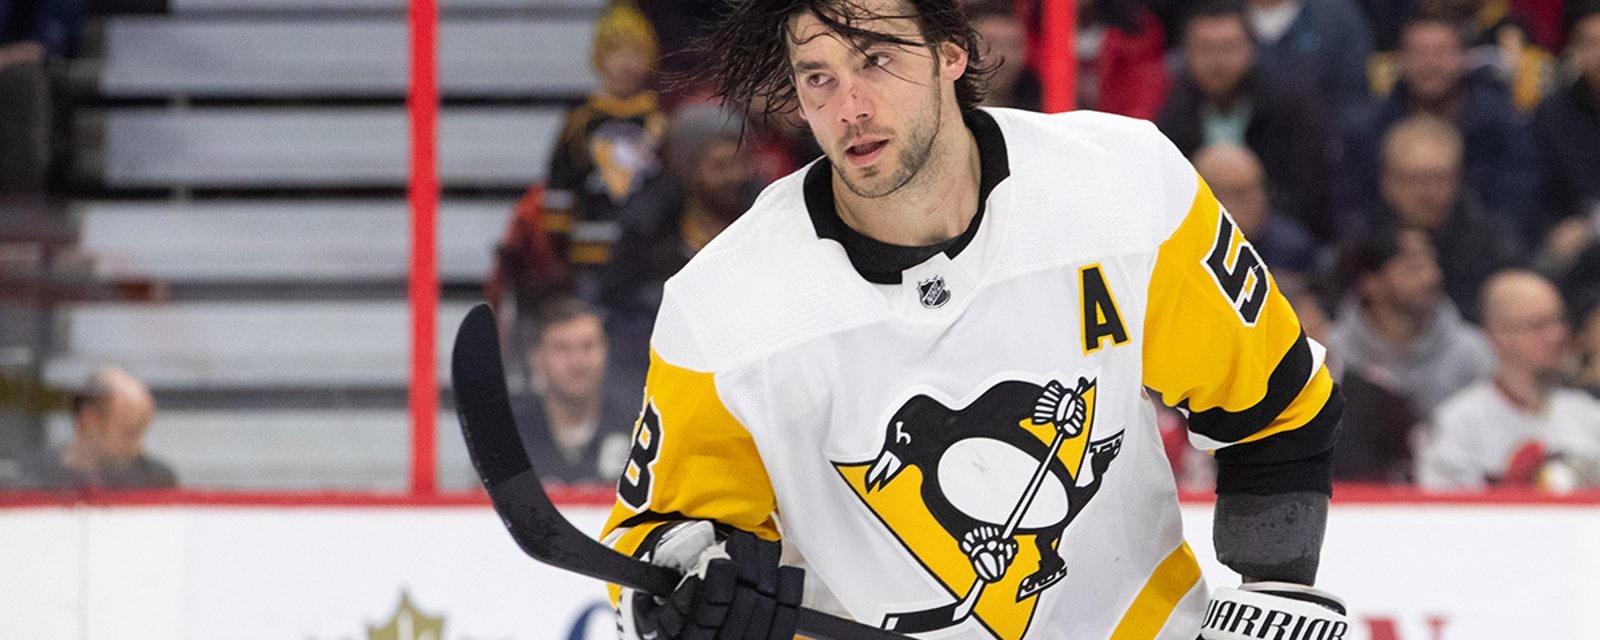 Setback in Letang’s recovery?